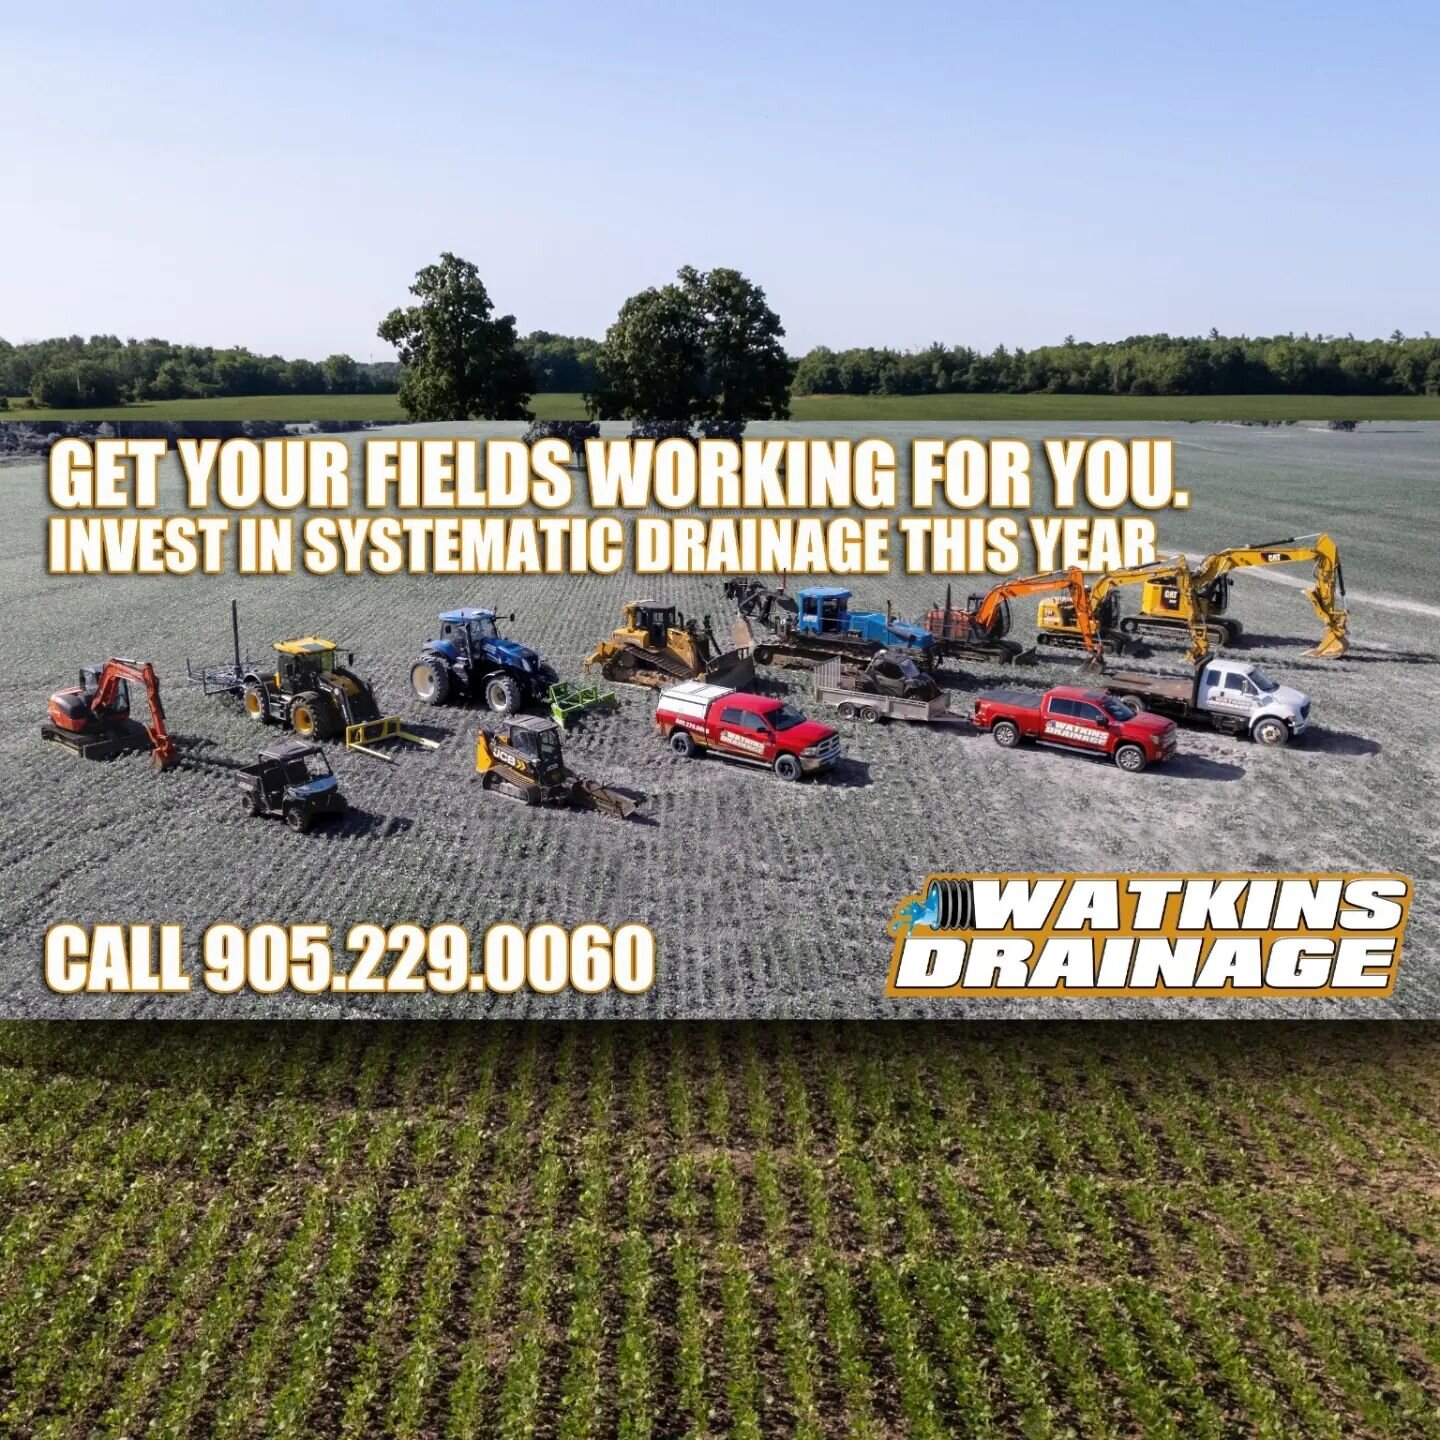 Get your fields working for you. Invest in systematic drainage this year. The results are more than worth it! 

905.229.0060

Or message us here!
.
#backyard #residential #residentialrealestate #realestate #farming #farmer #homegrown #rural #farmersm